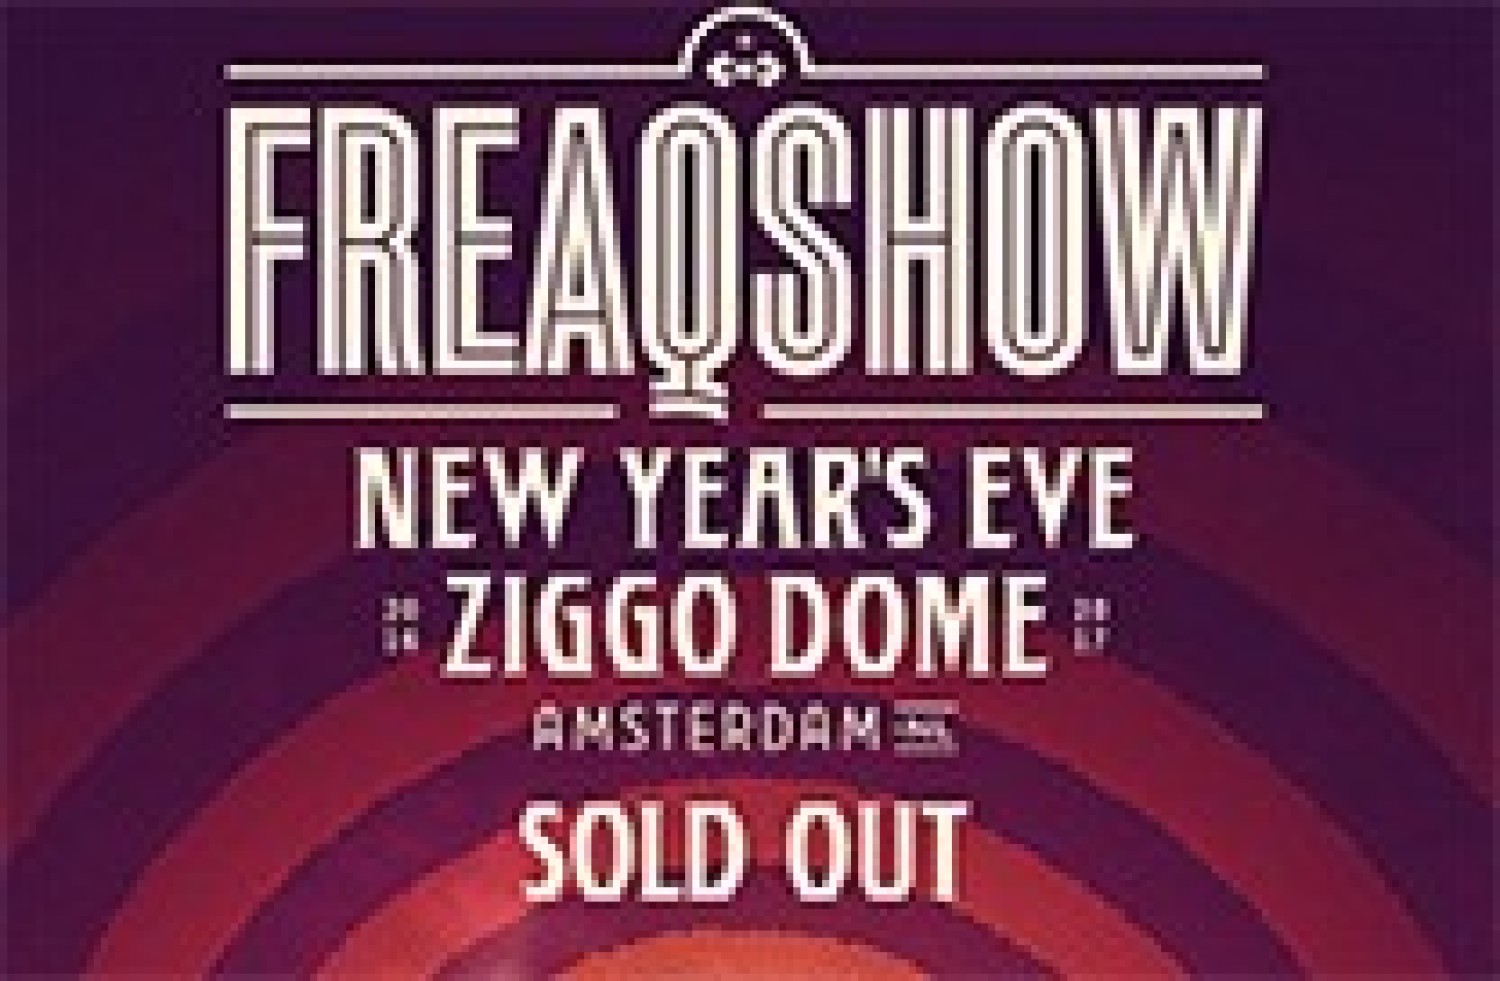 Party report: Freaqshow, Amsterdam (31-12-2016)